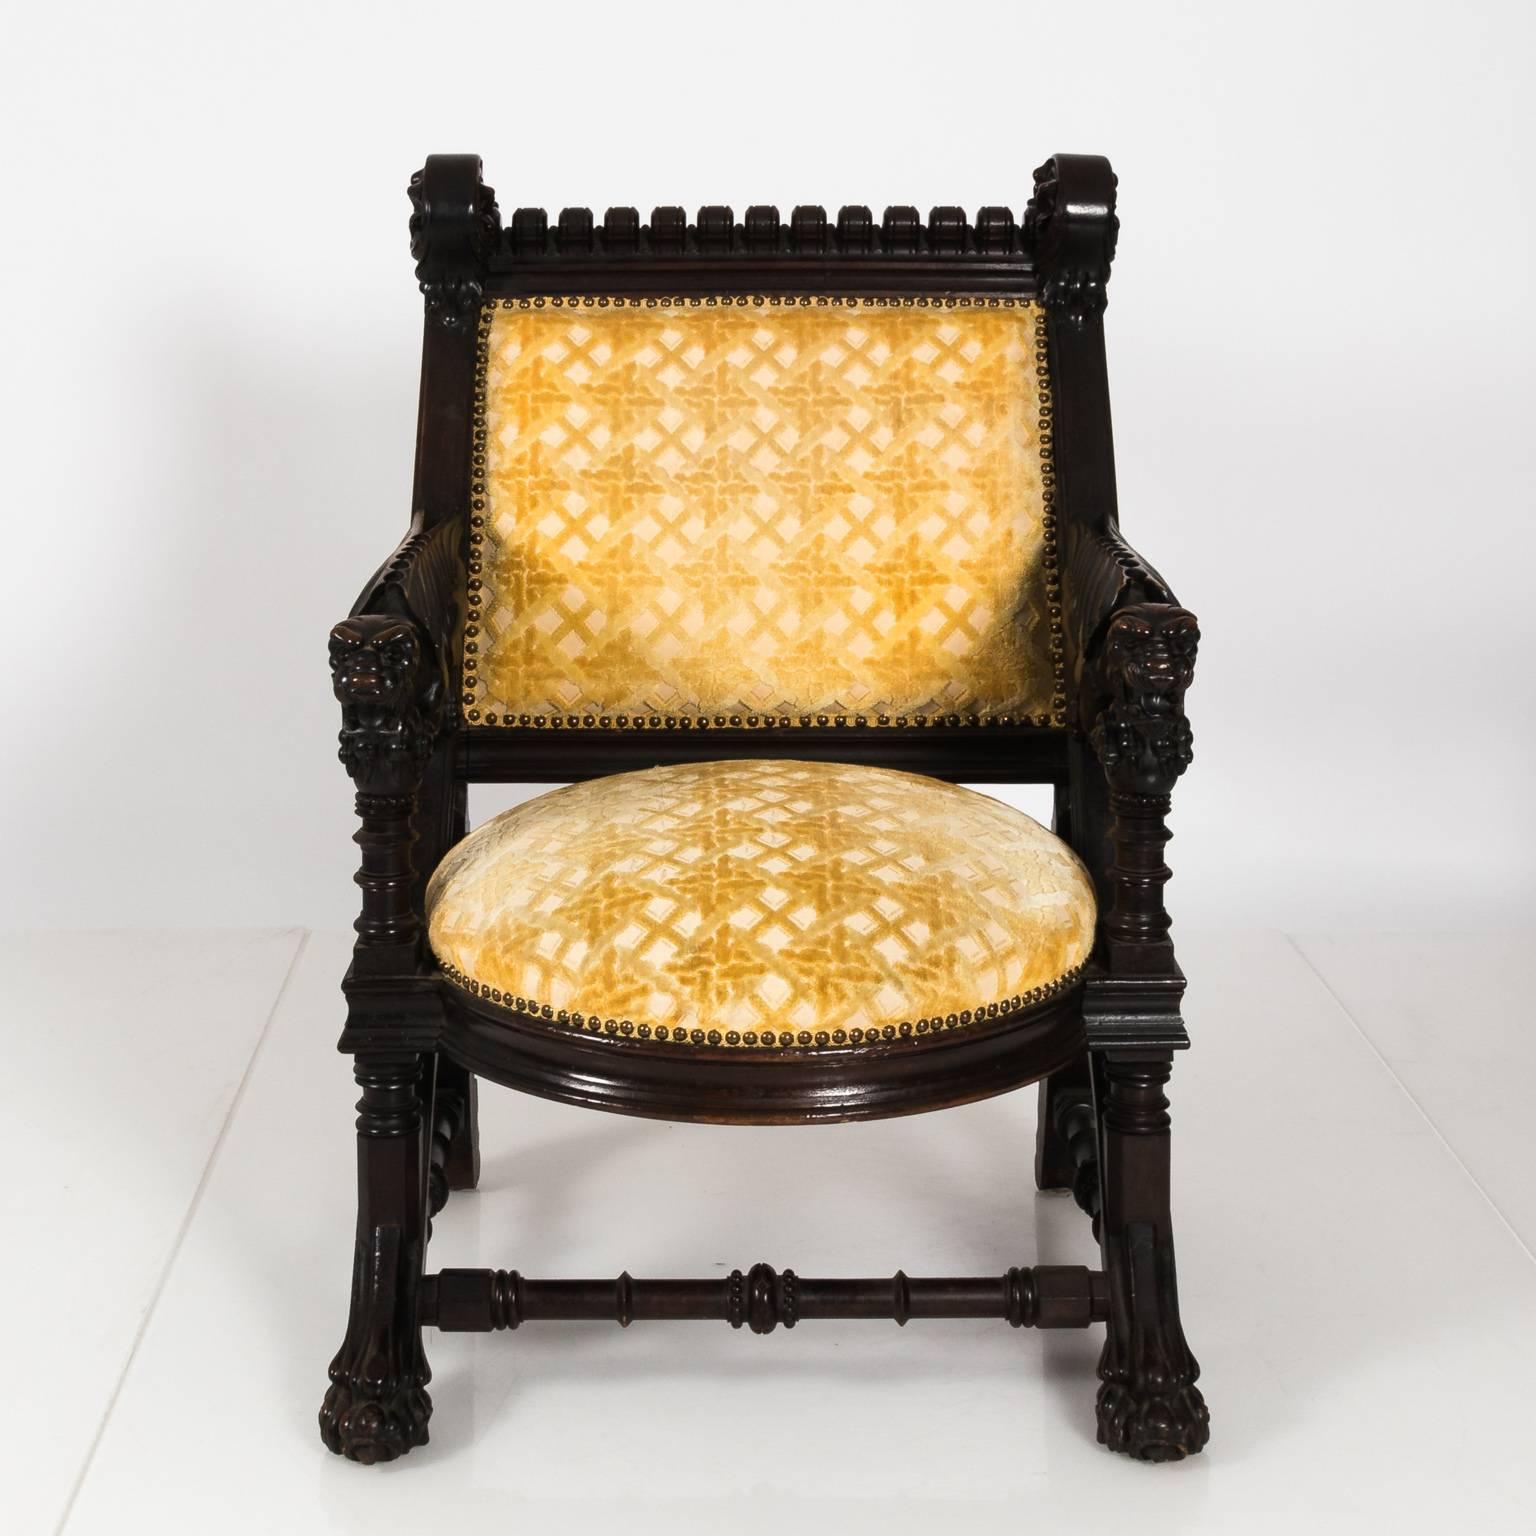 Pair of American Gothic Revival Armchairs by Daniel Pabst, circa 1878 For Sale 5